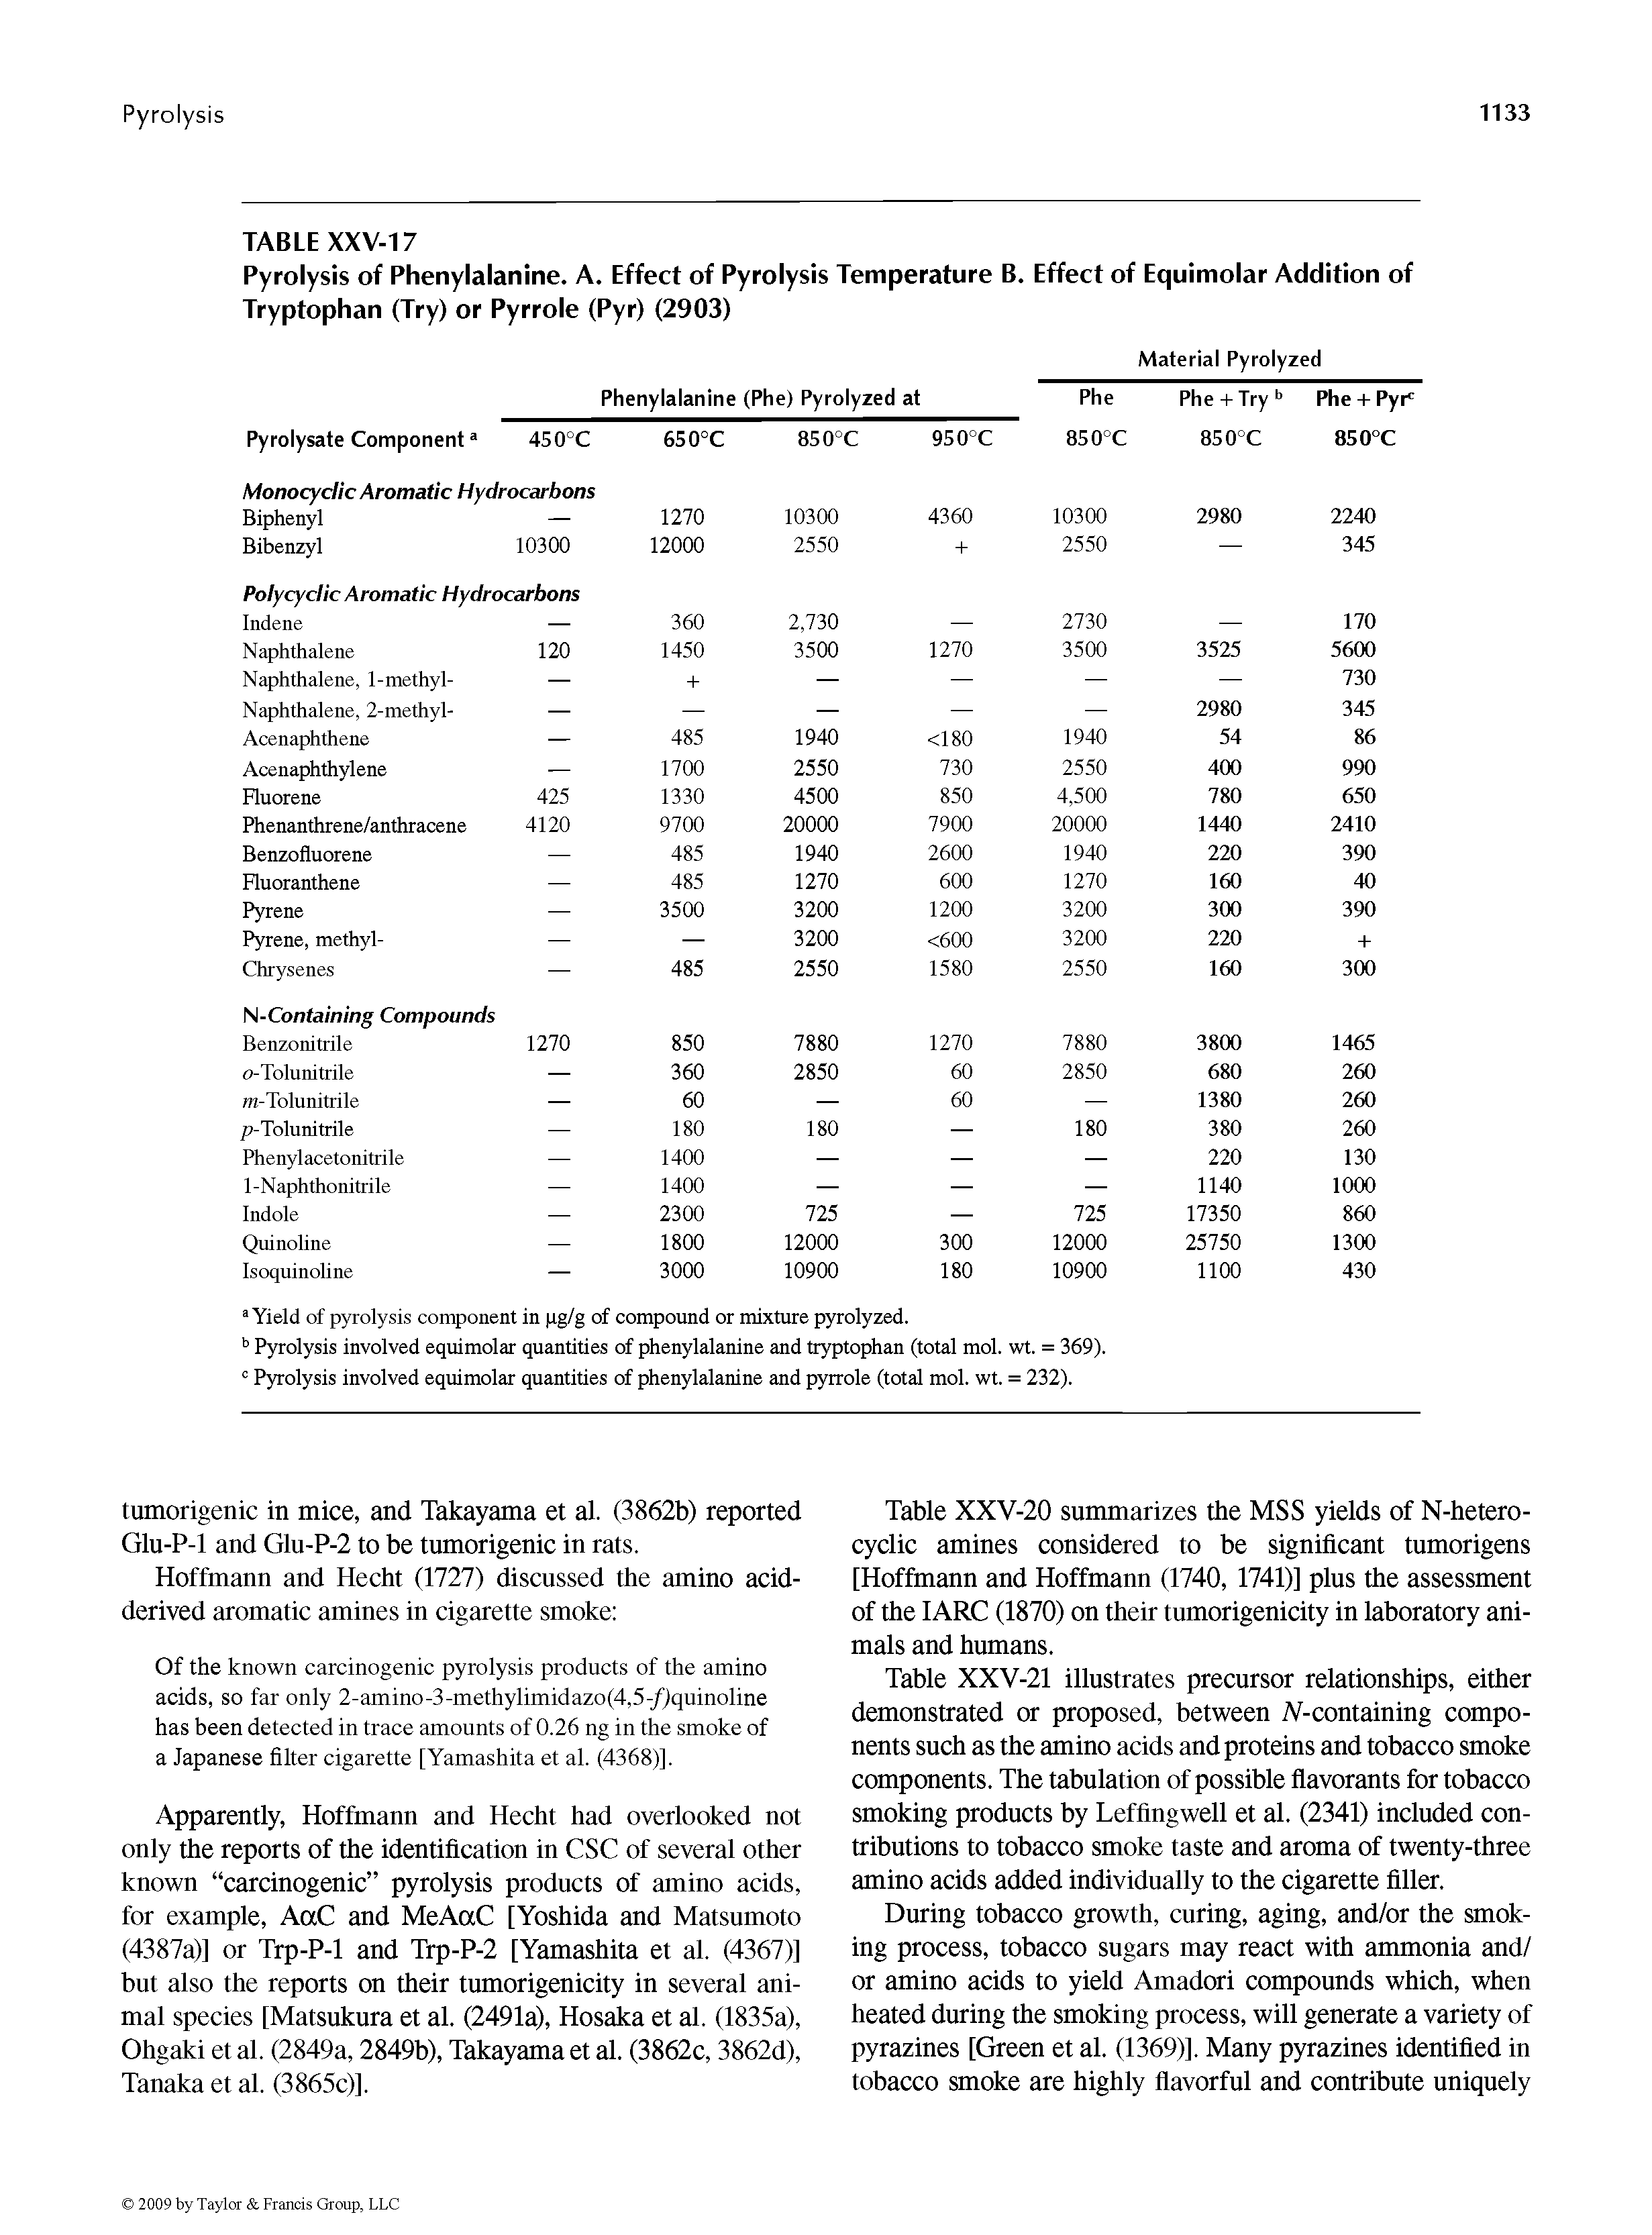 Table XXV-21 illustrates precursor relationships, either demonstrated or proposed, between 7V-containing components such as the amino acids and proteins and tobacco smoke components. The tabulation of possible flavorants for tobacco smoking products by Lefhngwell et al. (2341) included contributions to tobacco smoke taste and aroma of twenty-three amino acids added individually to the cigarette filler.